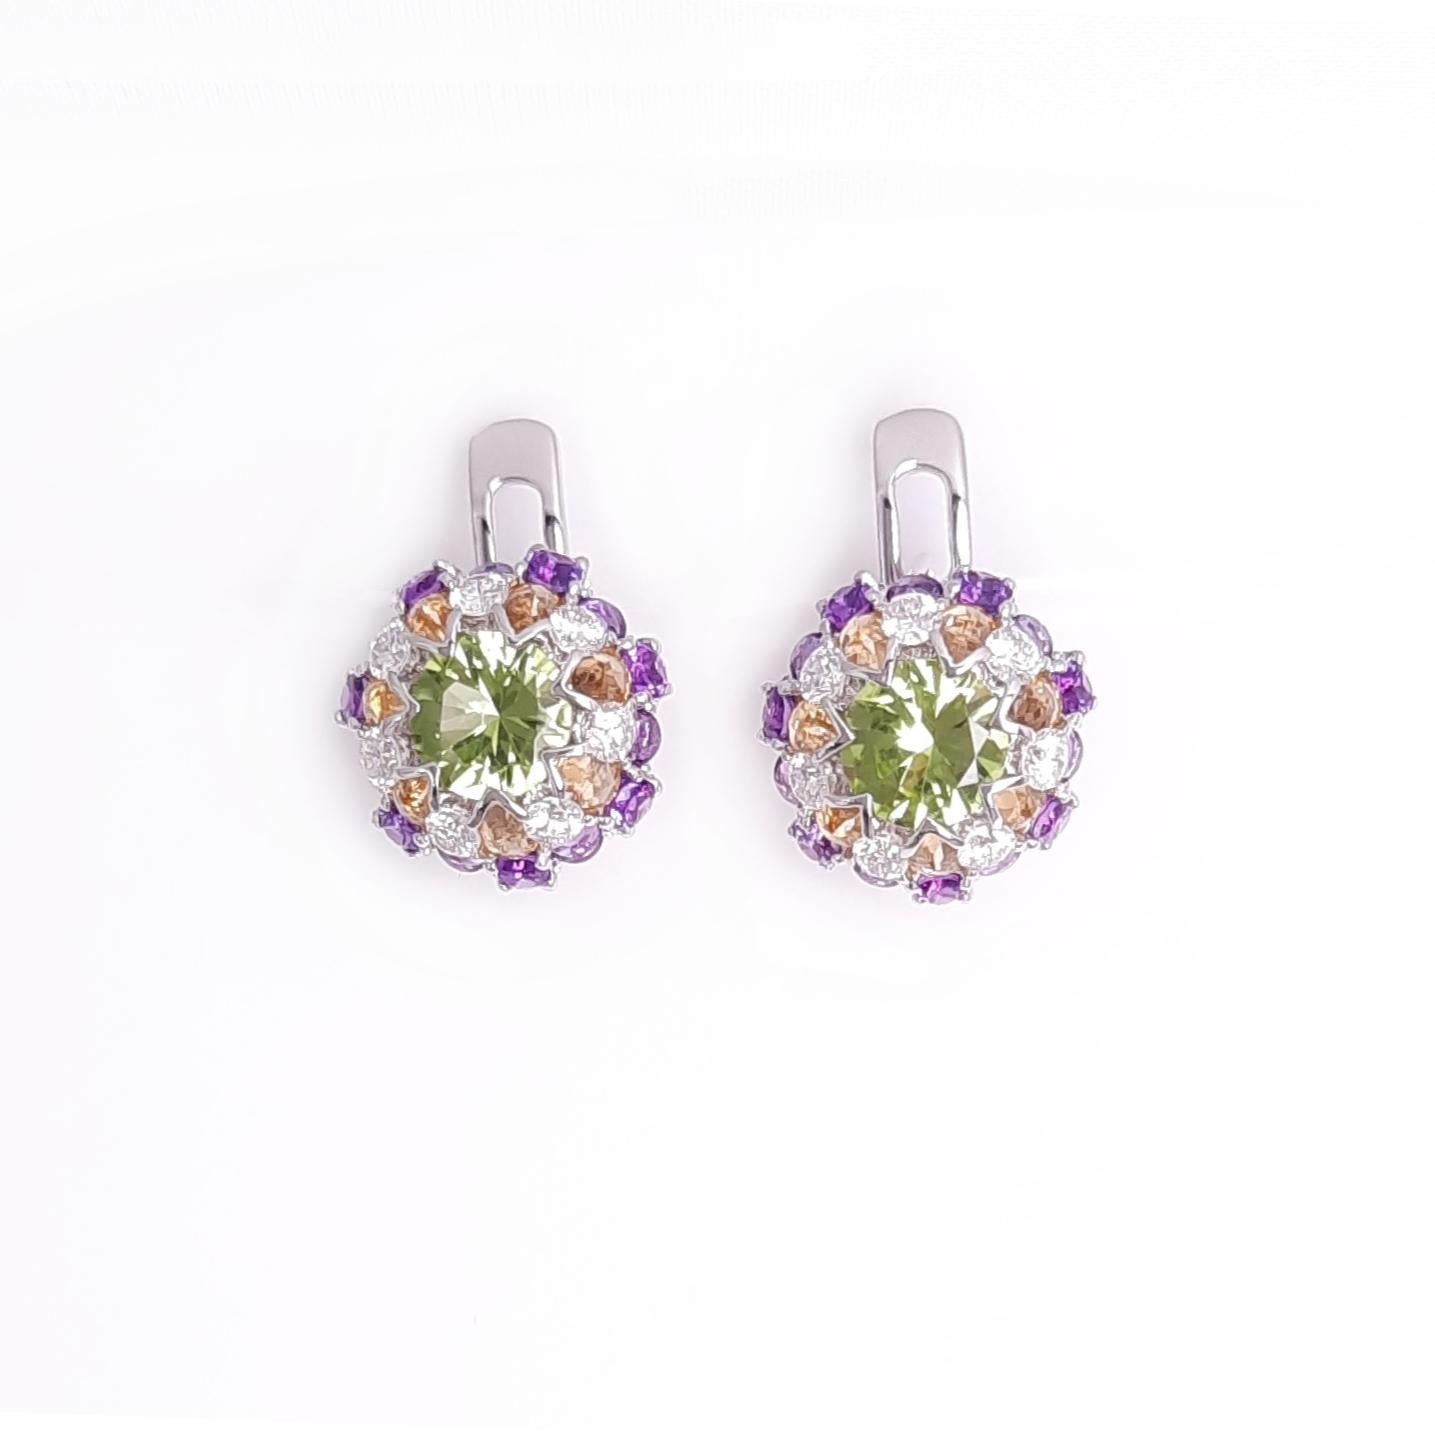 The combination of energetic bright peridot, graceful amethyst, and dazzling diamonds are used in the MOISEIKIN's Aurora collection, elaborating with a creative approach of an upside-down setting. Strictly selected precise stones reflect the light,